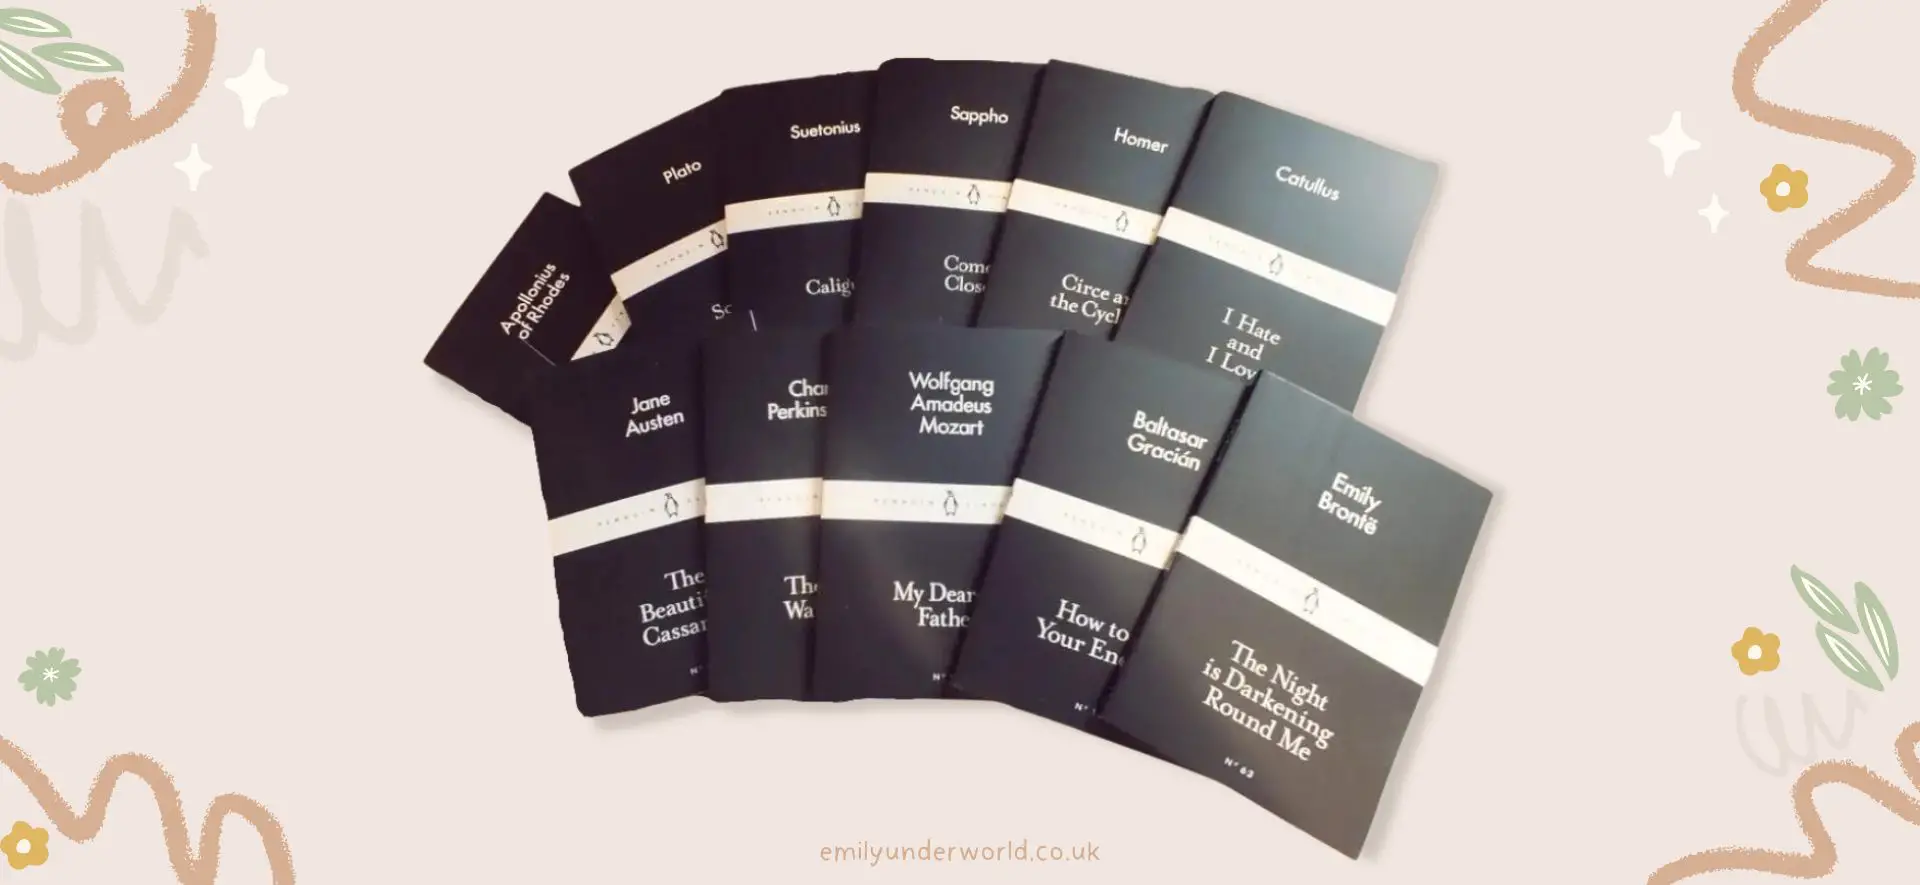 Penguin Little Black Classics: a great resource for writers